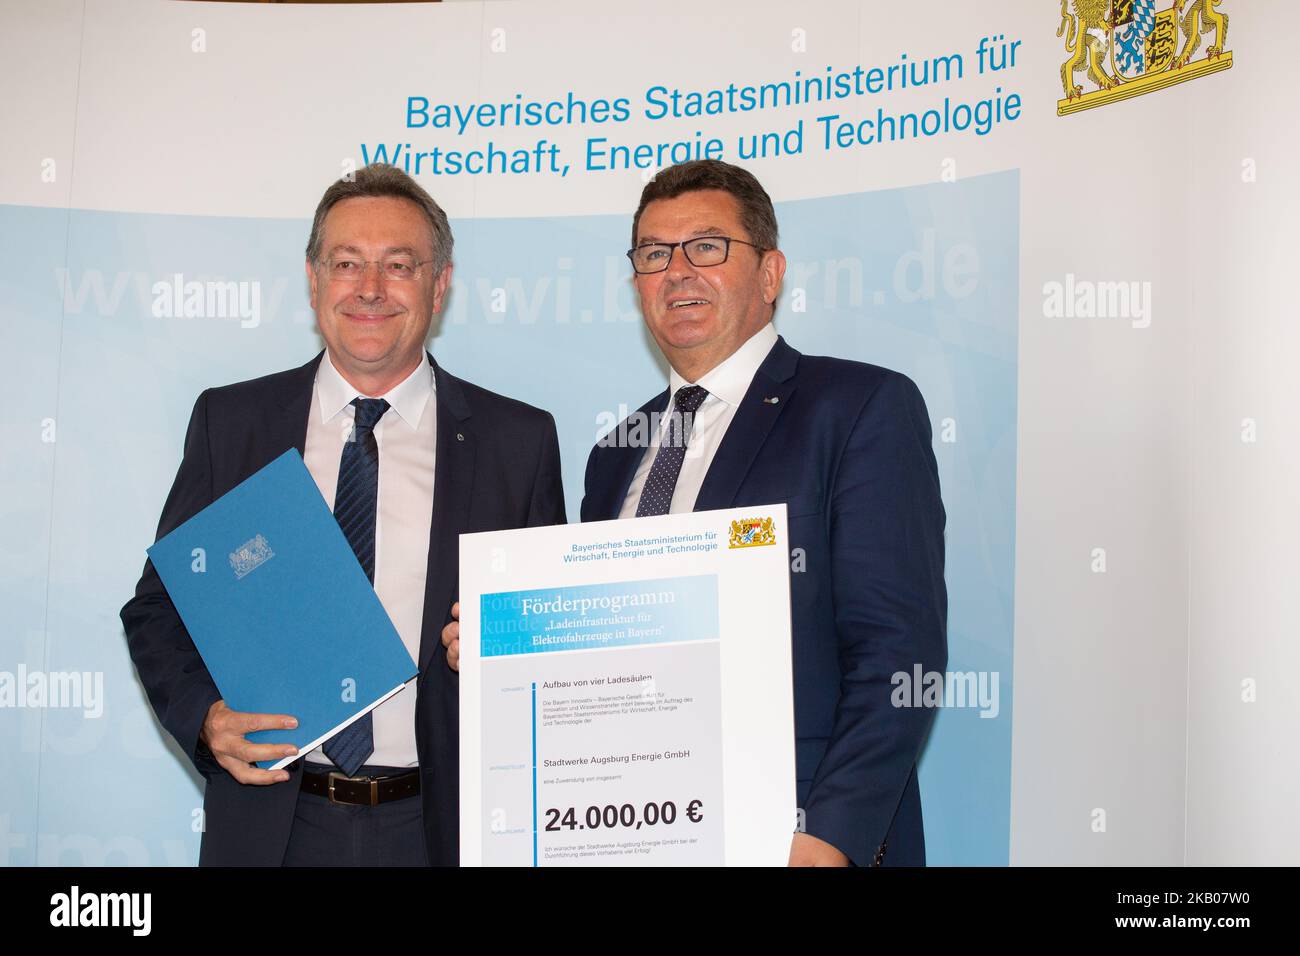 Franz-Josef Pschierer with the Stadtwerke Augsburg. Bavaria's minister of economy Franz-Josef Pschierer of the Christian Social Union (CSU) handed over the subsidy notes to companies, that will build e-car stations in Bavaria. In a short speech he said, that e-car are very important for the environment and the future and called China a role model. (Photo by Alexander Pohl/NurPhoto) Stock Photo